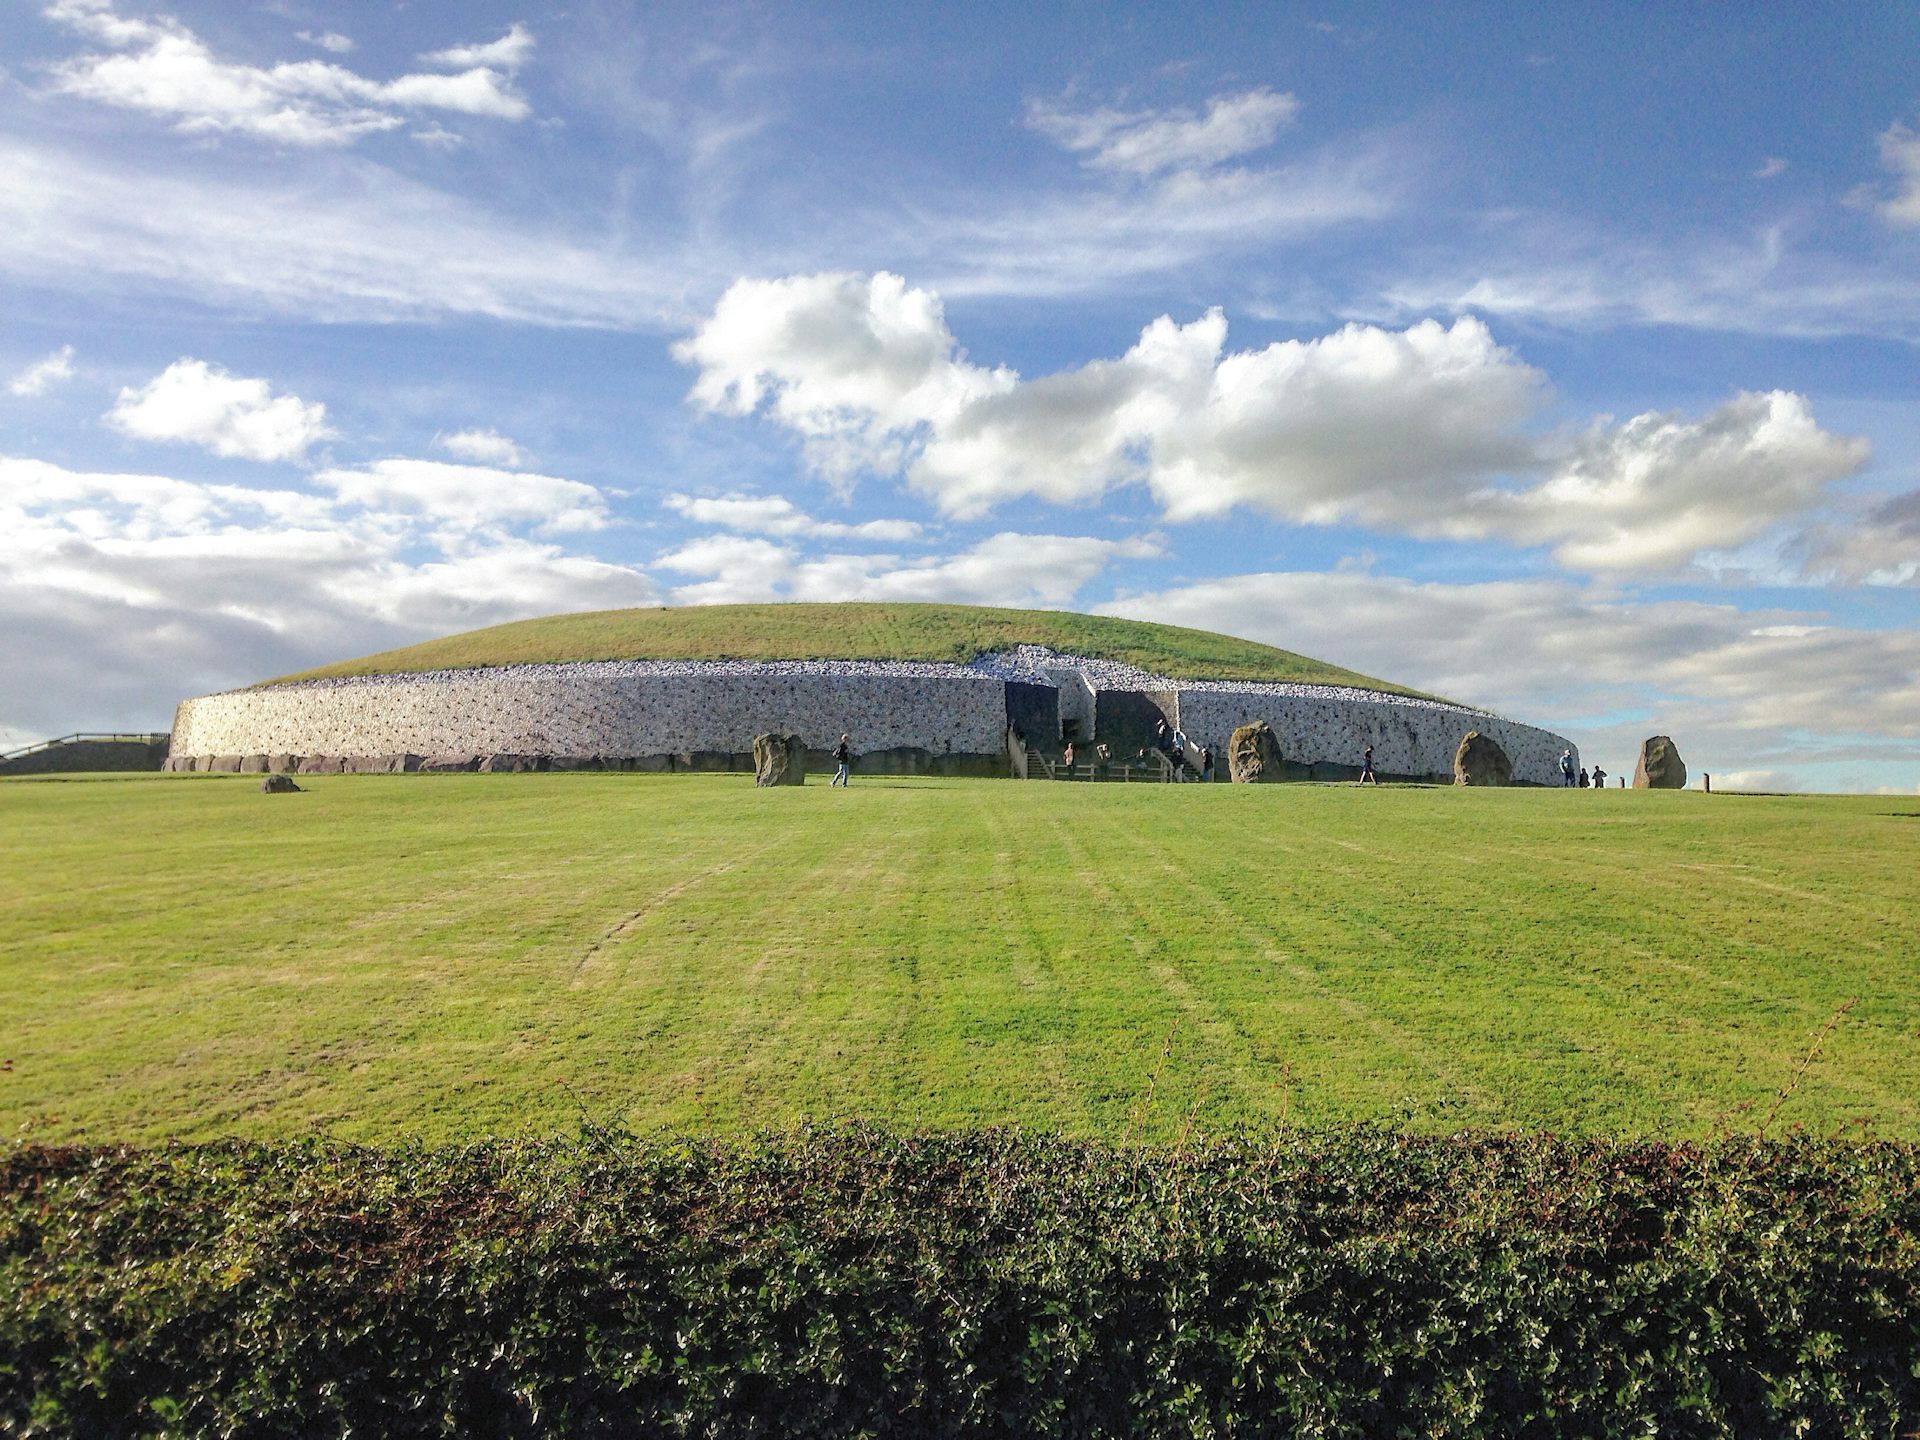 A front view of the Newgrange monument in Ireland taken from outside the grounds.